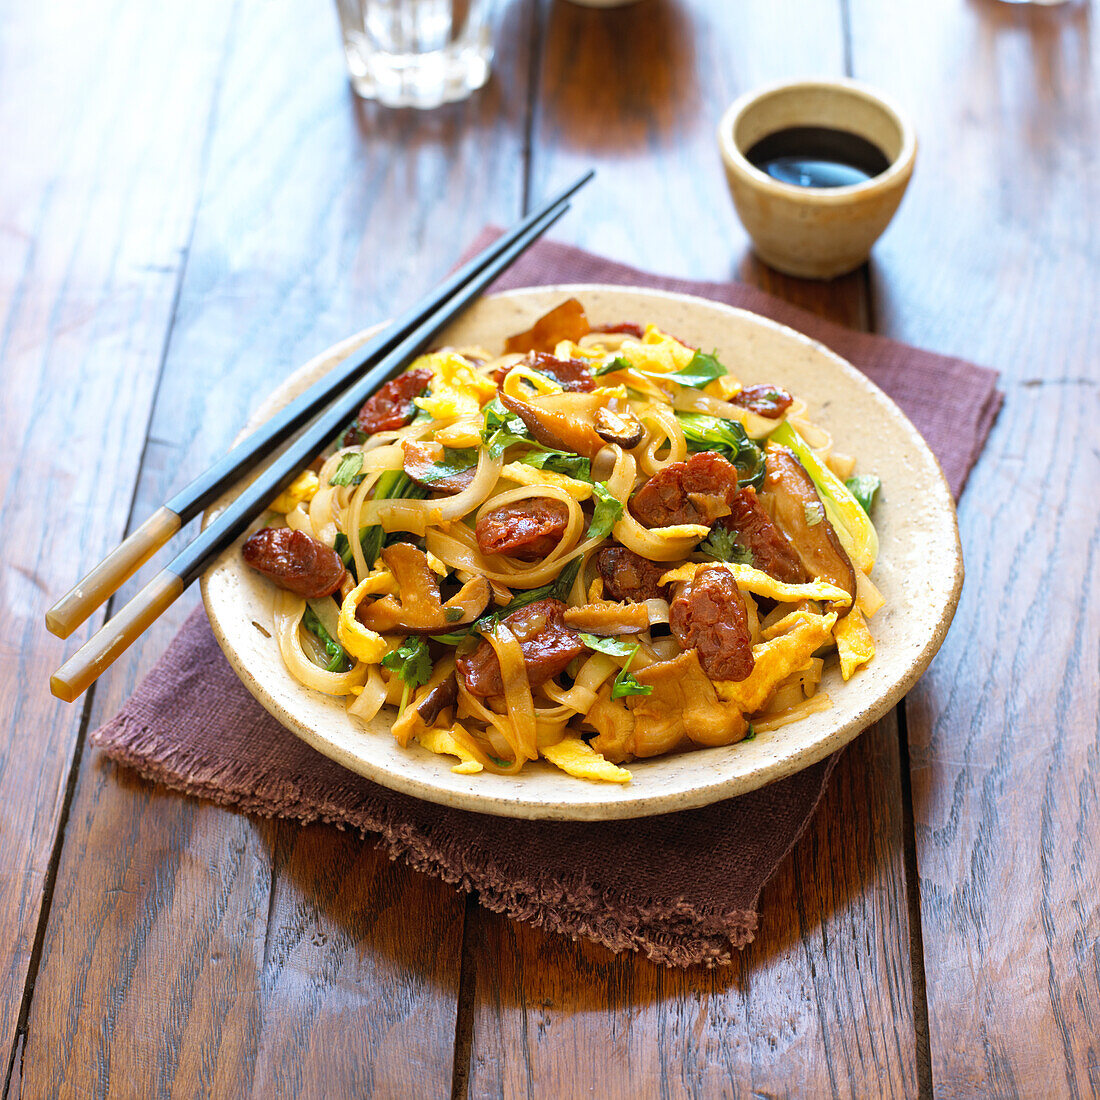 Stir-fried noodles with Chinese sausage and shiitake